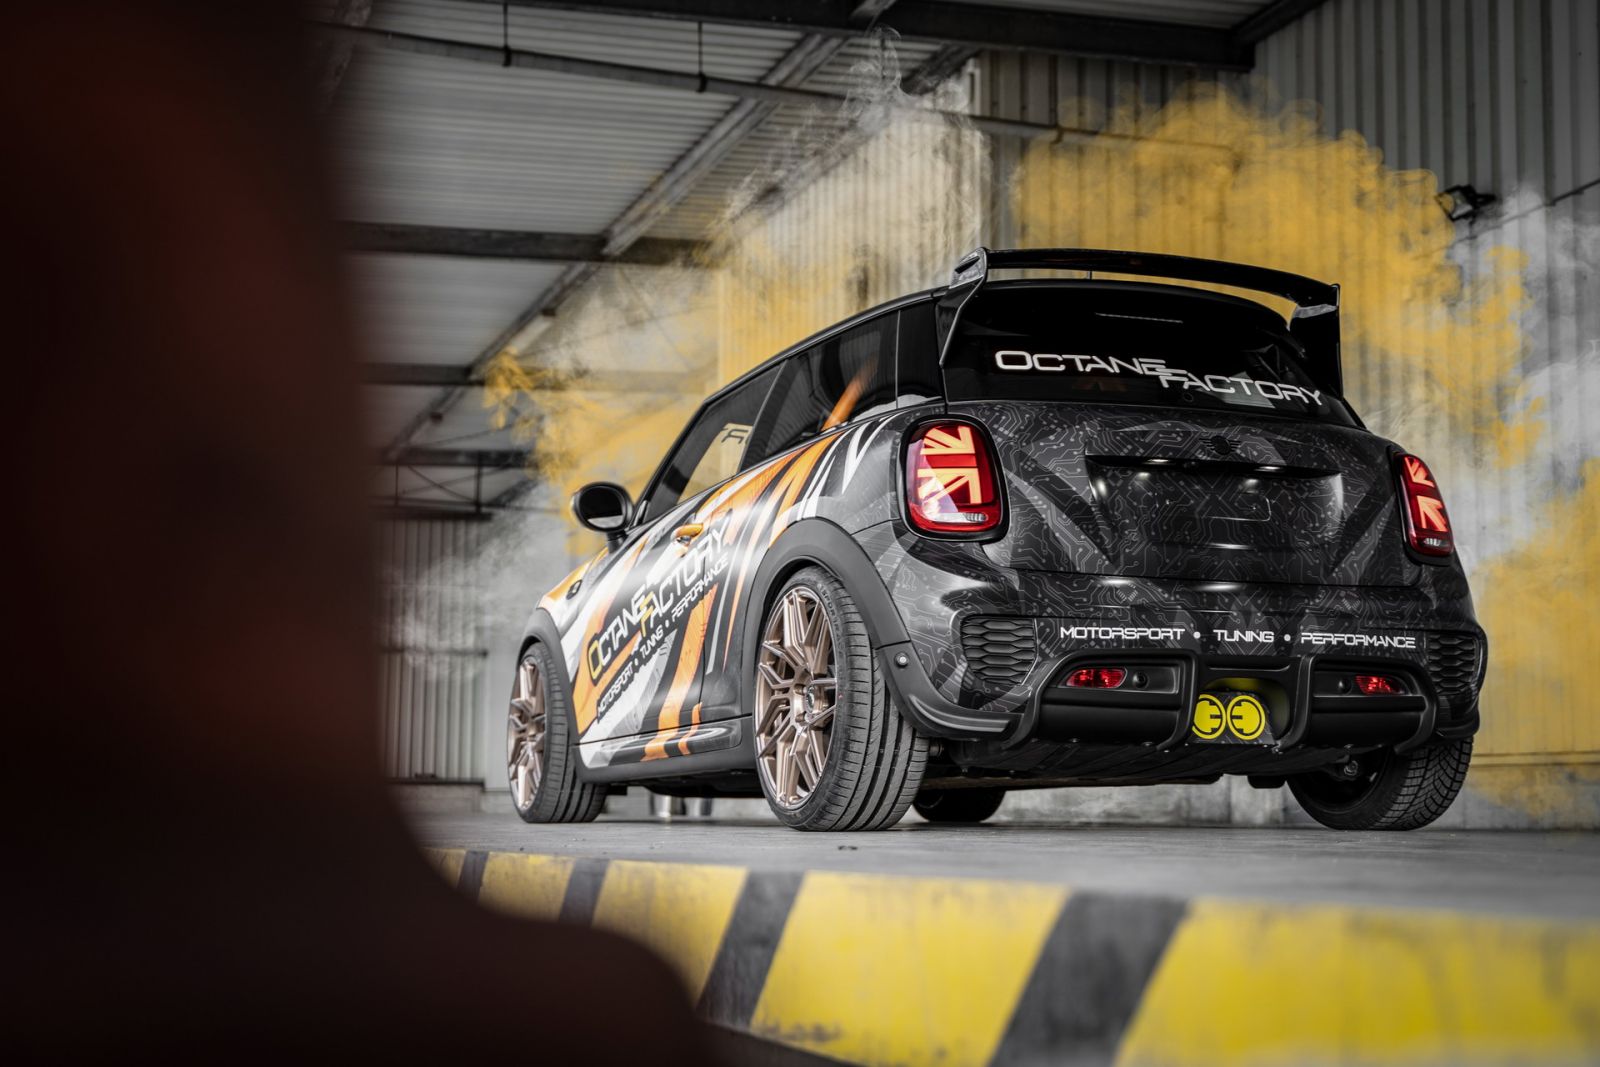 MINI Cooper SE by OctaneFactory and Barracuda Racing